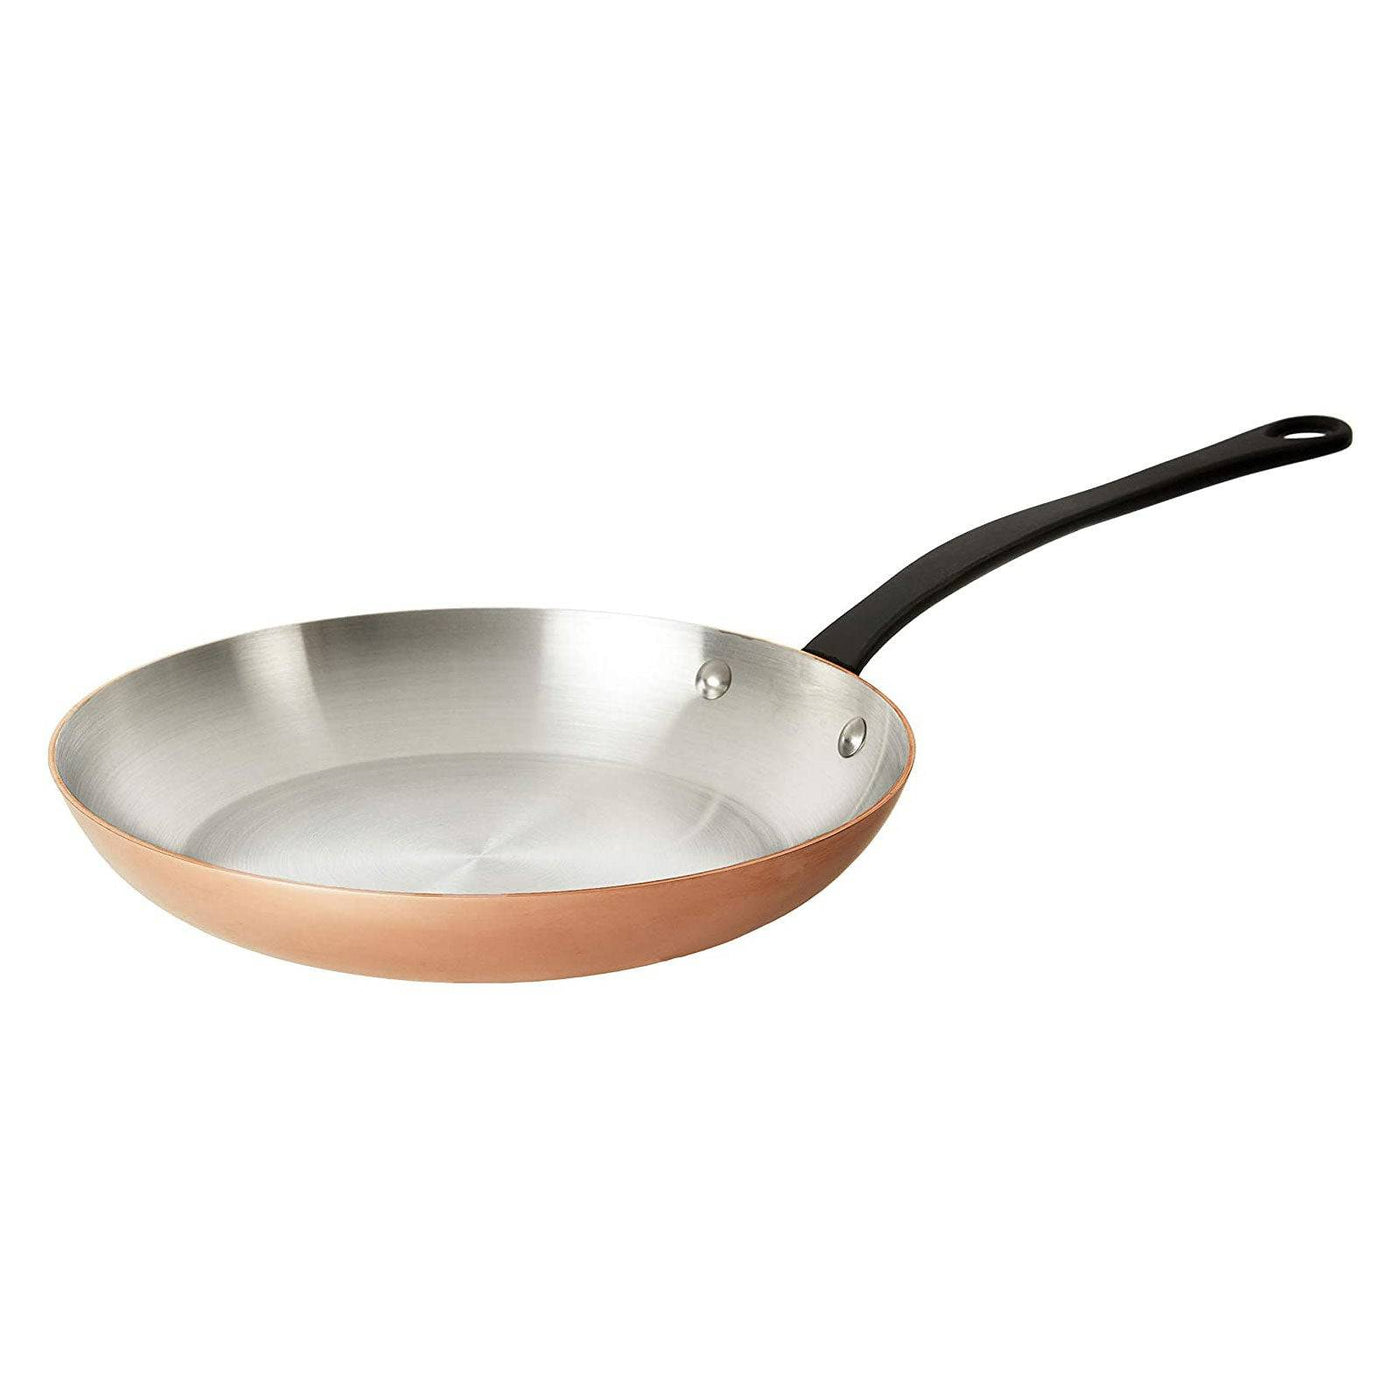 Mauviel M'heritage M200ci 2.0 mm Copper Frying Pan, 8-in. - Kitchen Universe